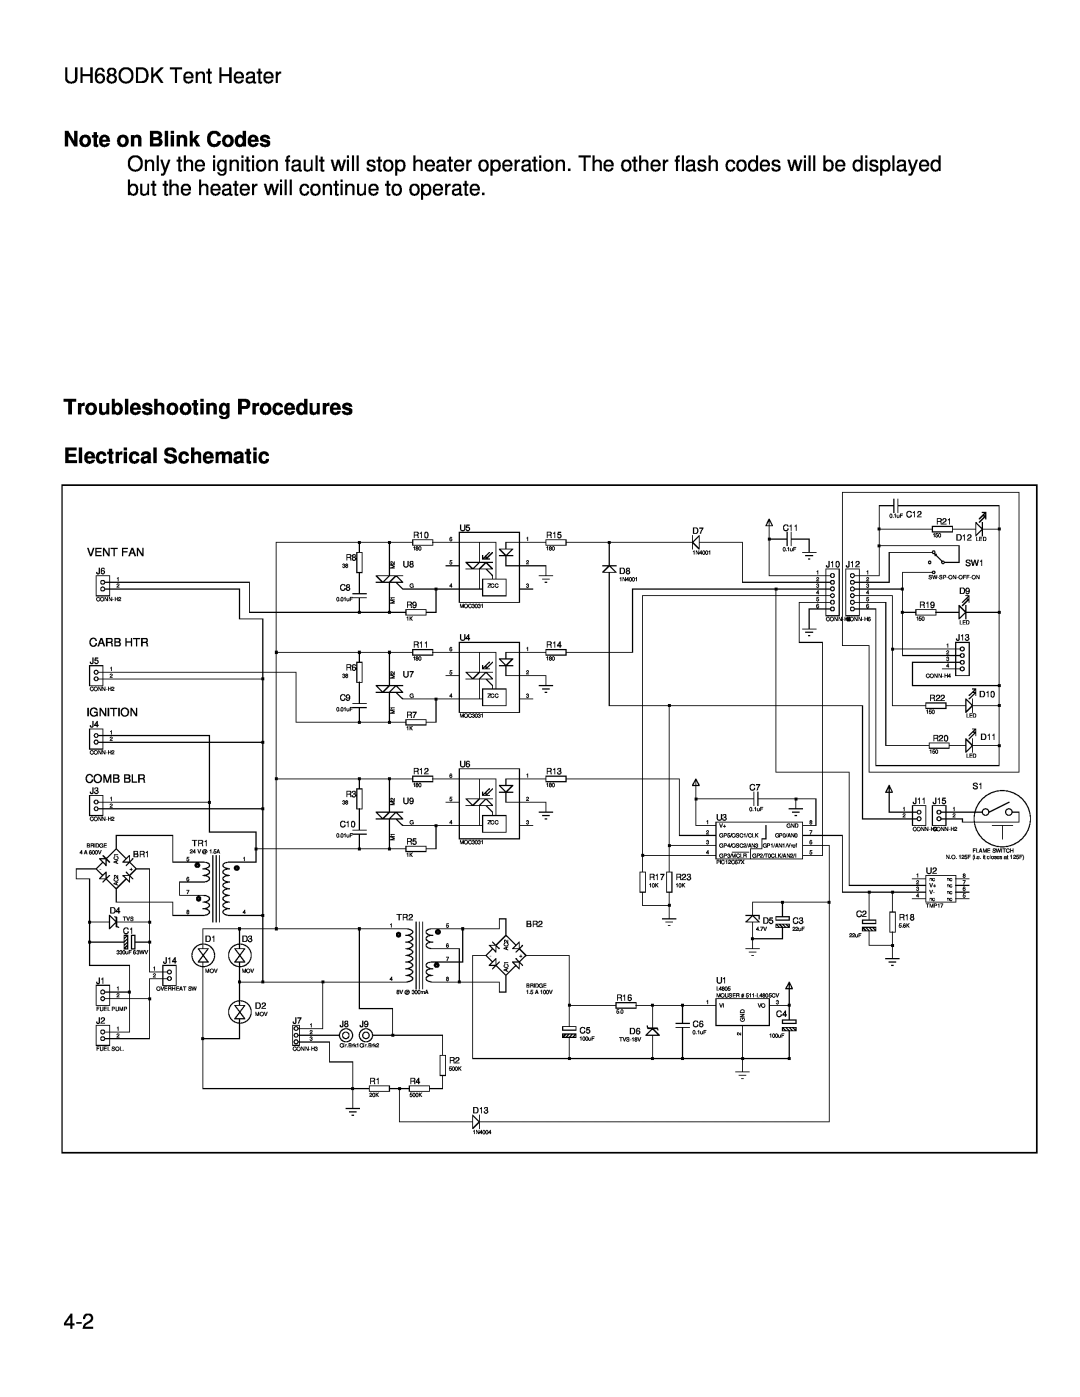 Hunter Fan UH68ODK Note on Blink Codes, Troubleshooting Procedures Electrical Schematic, Ignition, Vent Fan, Carb Htr 